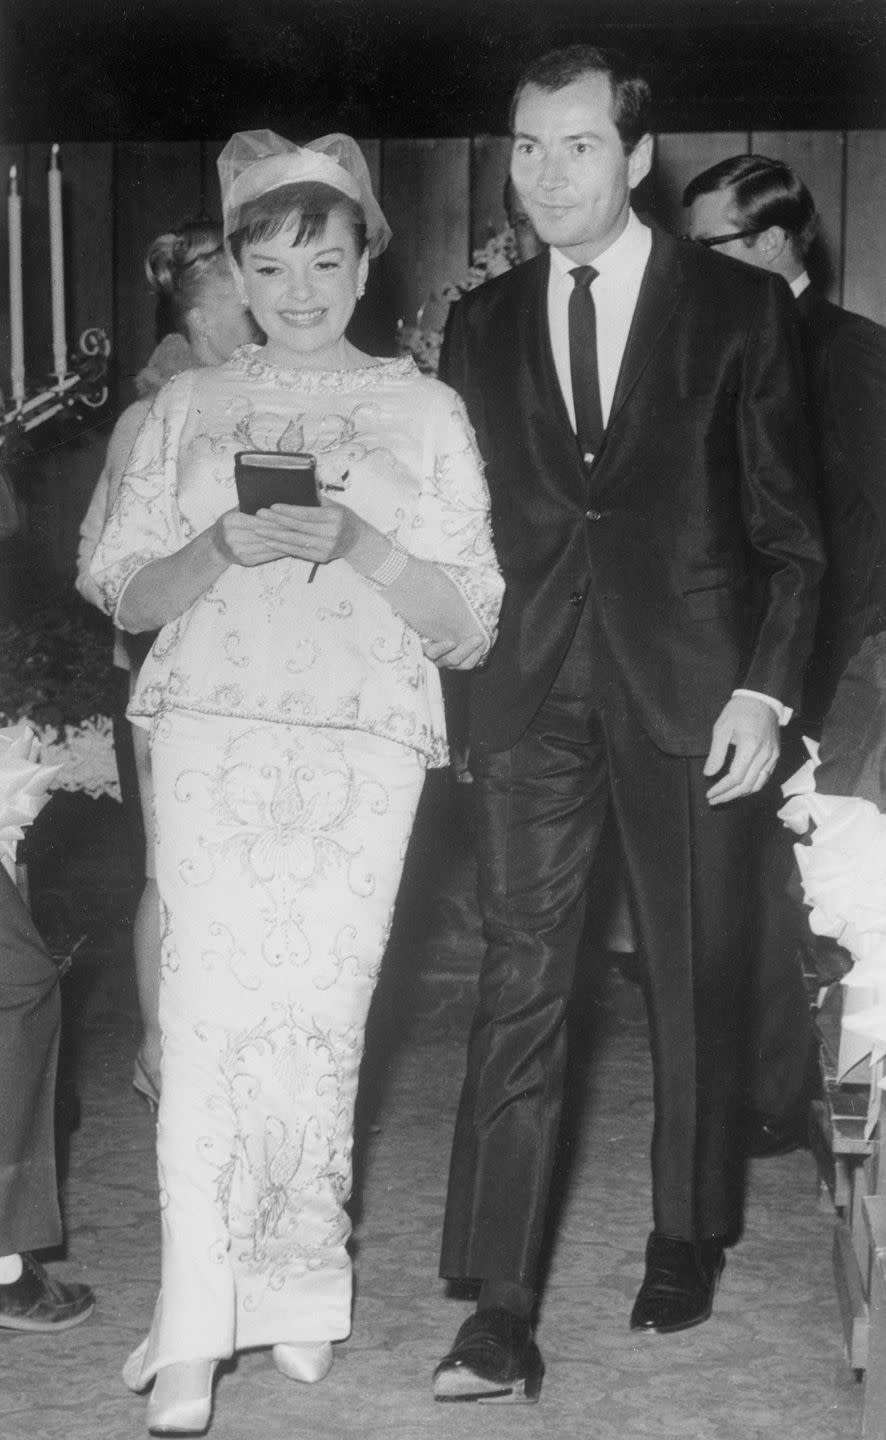 <p>After Judy Garland's divorce from her third husband, Sid Luft, was finalized, she quickly married tour manager Mark Herron at the Sahara Hotel in Vegas. However, the marriage didn't last long; Garland and Herron separated within five months. </p><p>Here, the two walk down the aisle of a Las Vegas wedding chapel at 1:30 a.m.; their marriage was witnessed by a small group of Garland's close friends. </p><p><a href="https://www.townandcountrymag.com/leisure/arts-and-culture/a30284220/judy-garland-husbands/" rel="nofollow noopener" target="_blank" data-ylk="slk:Read more: Who Were Judy Garland's Five Husbands?" class="link ">Read more: Who Were Judy Garland's Five Husbands?</a> </p>